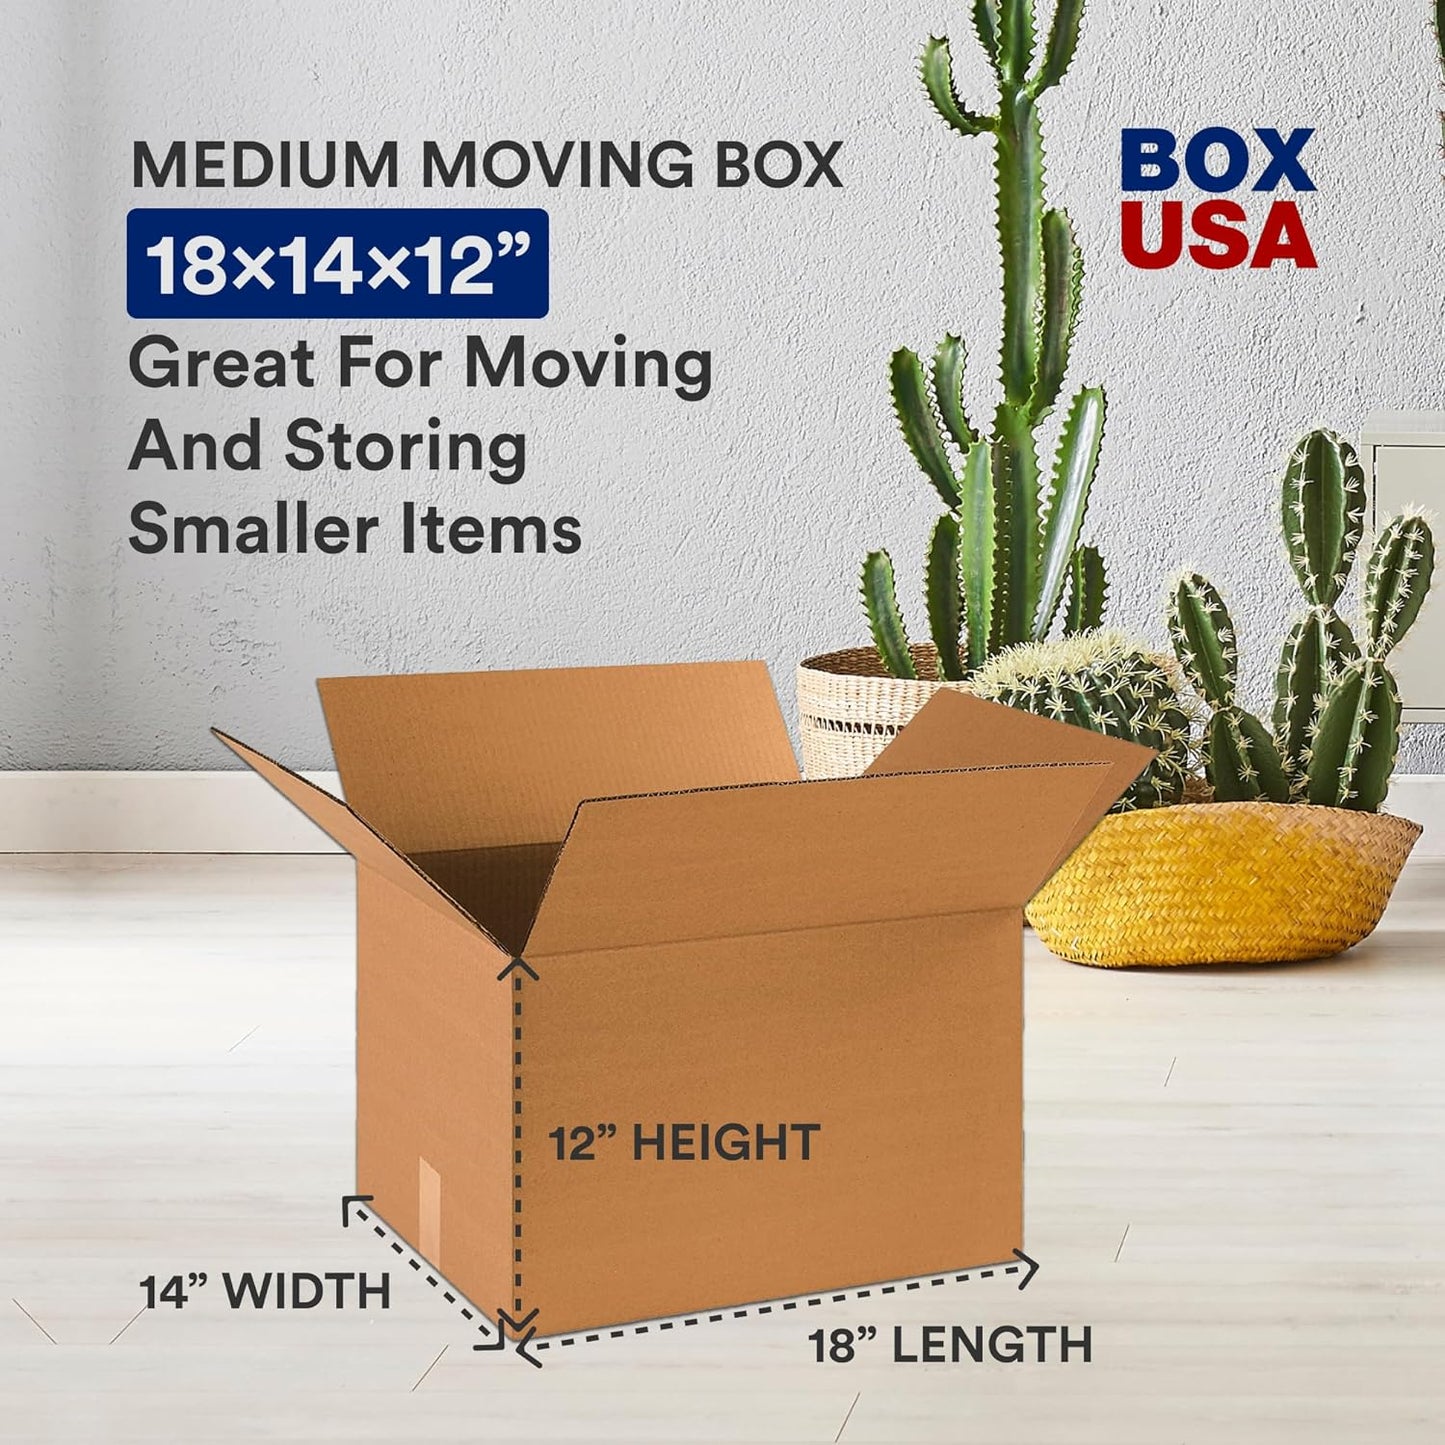 Uniites™ BOX USA Moving or Shipping Boxes Medium 18x14x12", 10-Pack | Corrugated Cardboard Box for Mailing Packing Packaging and Storage $19.91